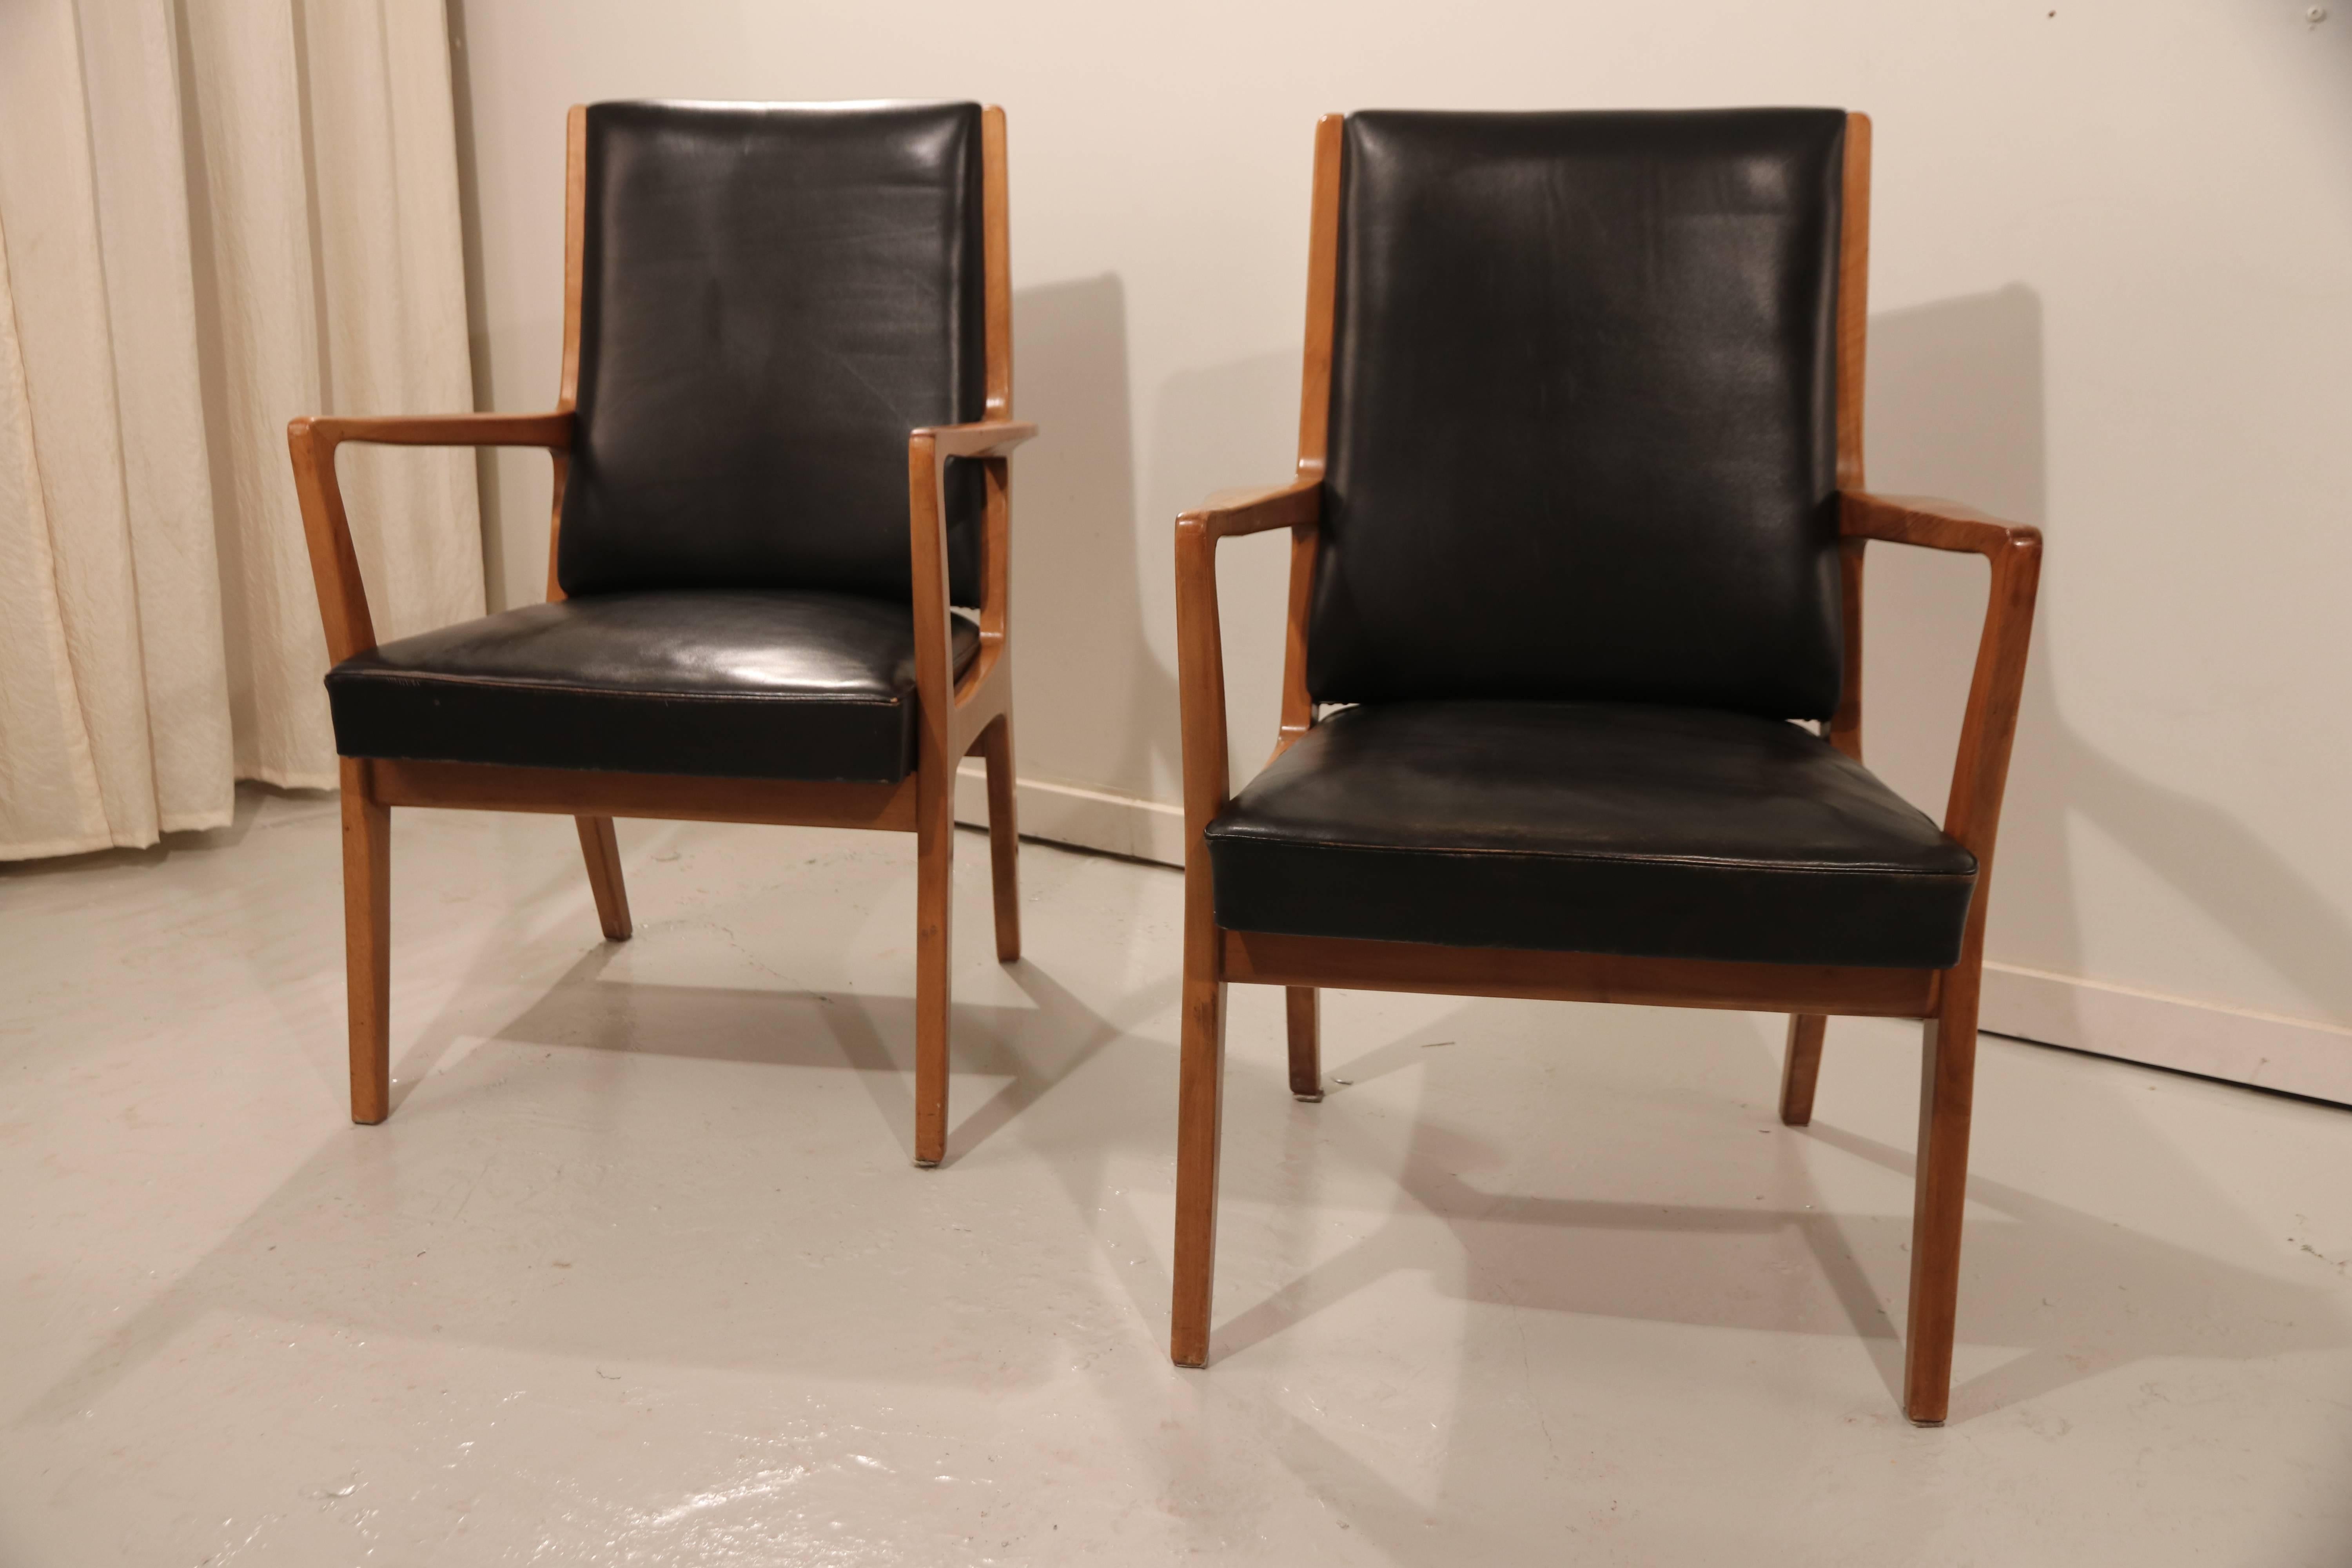 A wonderful set of two large beautifully shaped side chairs or dining chairs with a beautiful soft aniline leather seat. The chairs were once sold by Cologne's chicest furniture shop, named Pesch. These chairs are ideal as side chairs for in the